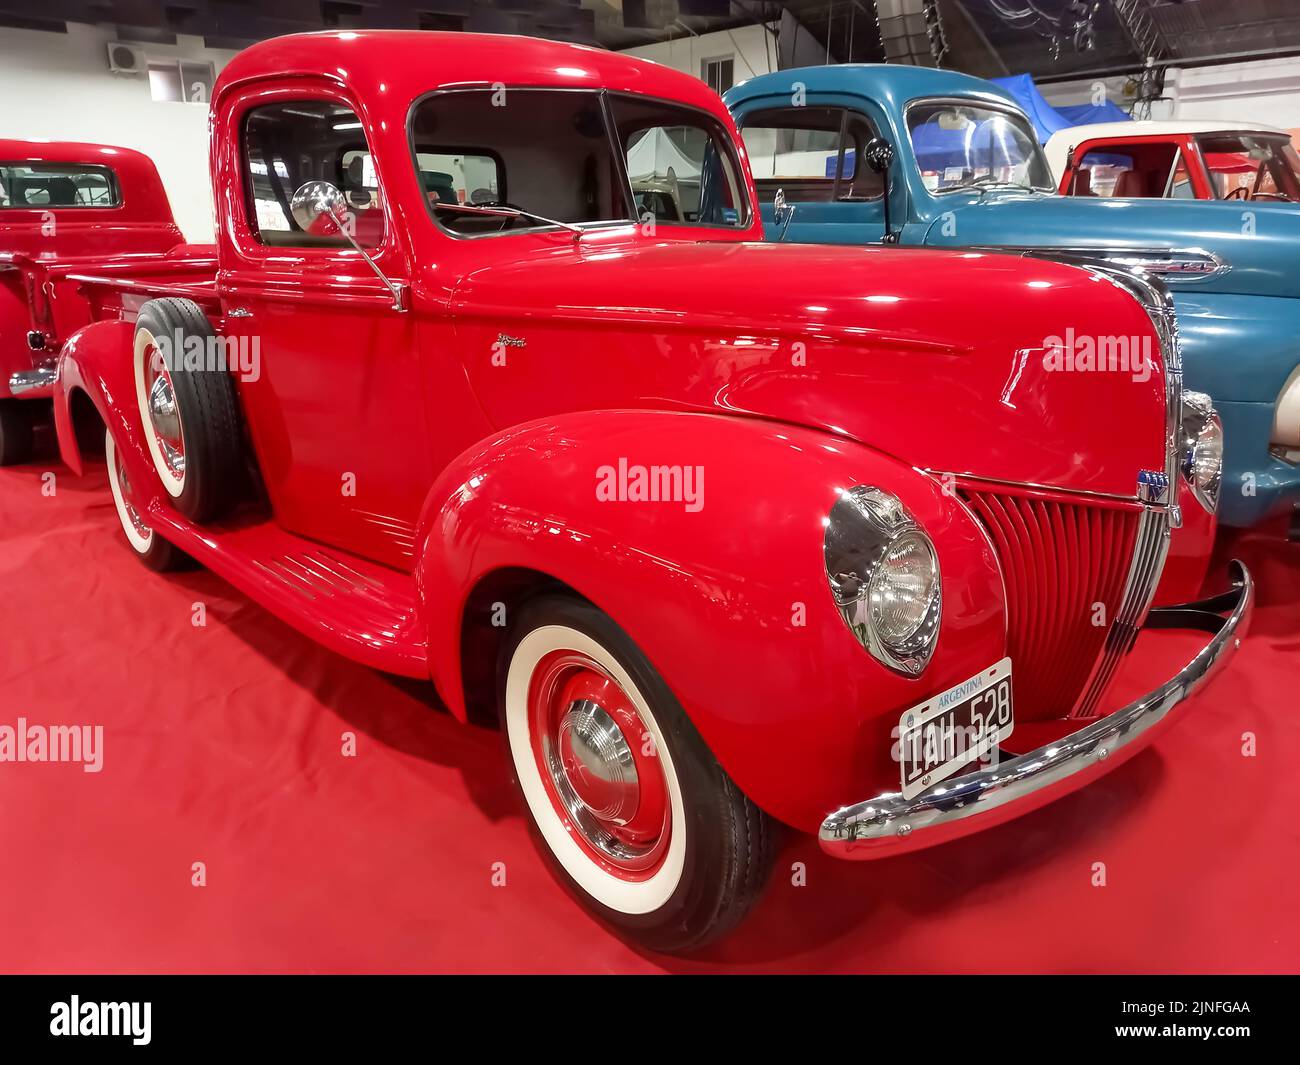 Old vintage red 1940 Ford V8 model 83 utility pickup truck on the carpet. Exhibit hall. Classic car show. Stock Photo